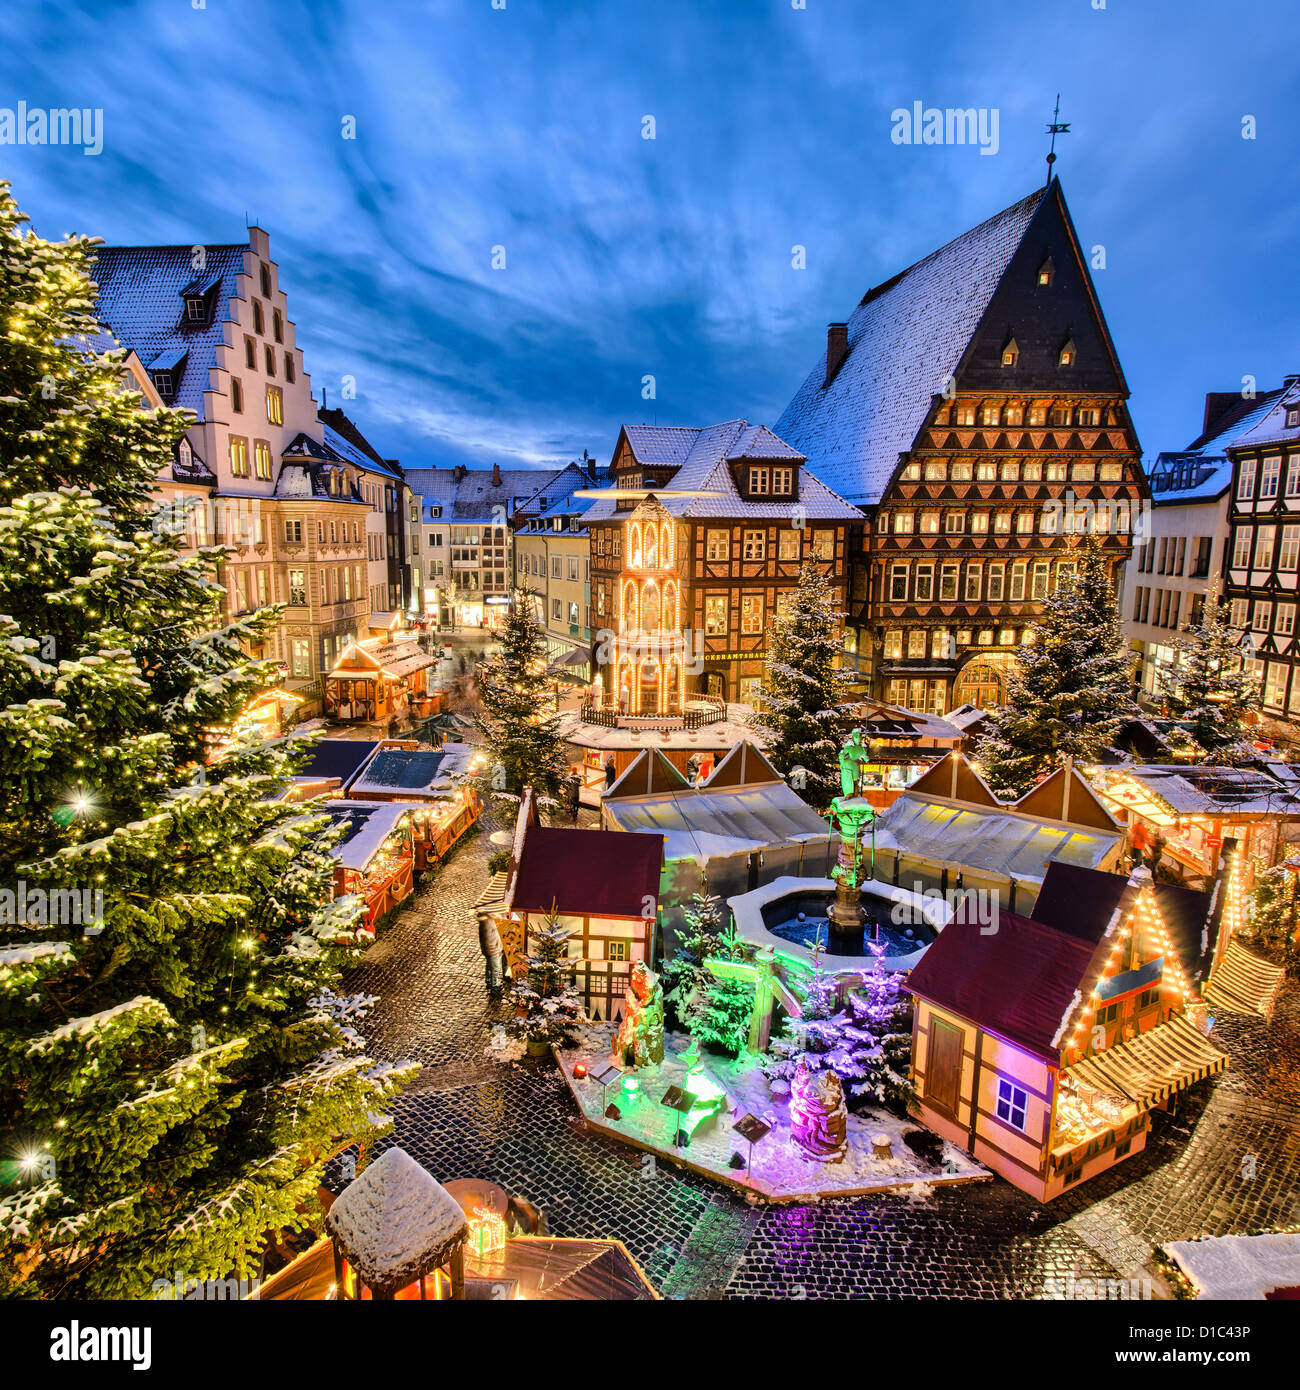 Christmas Market on the historic market place in Hildesheim, Germany Stock Photo